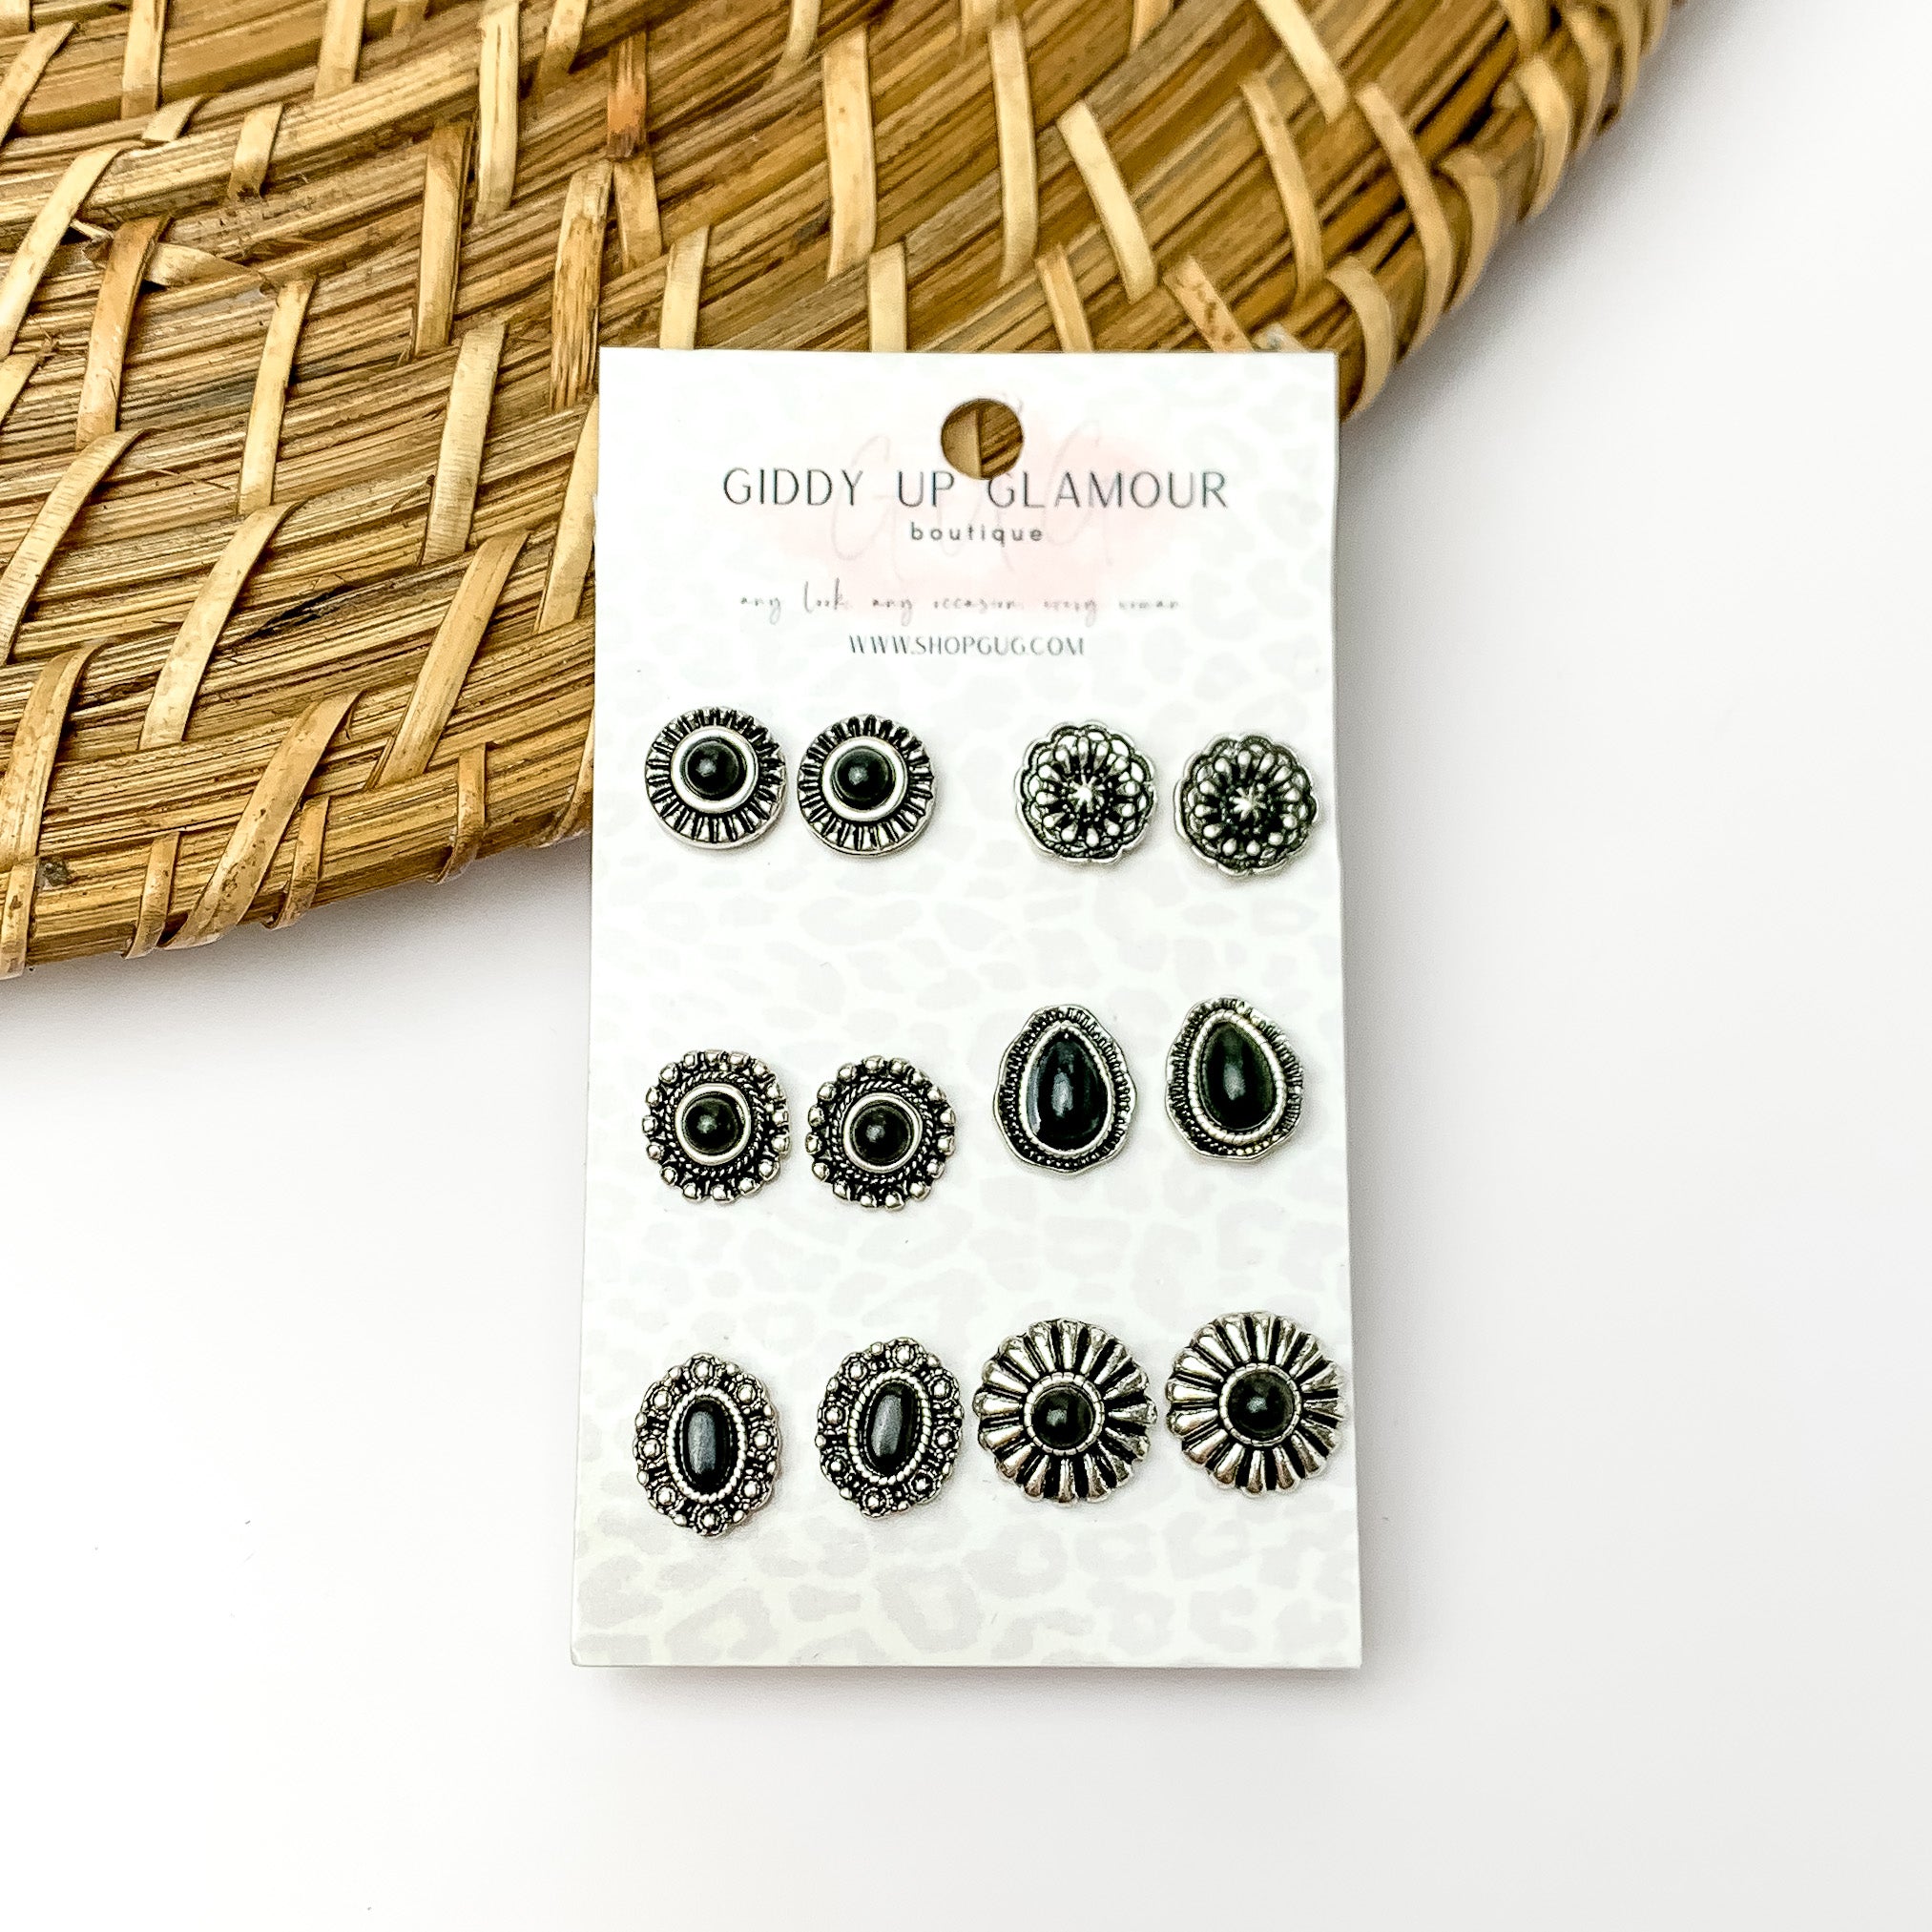 Set of six black and silver designed circular earrings. Pictured on a white background with wood like decorations in the top left corner.